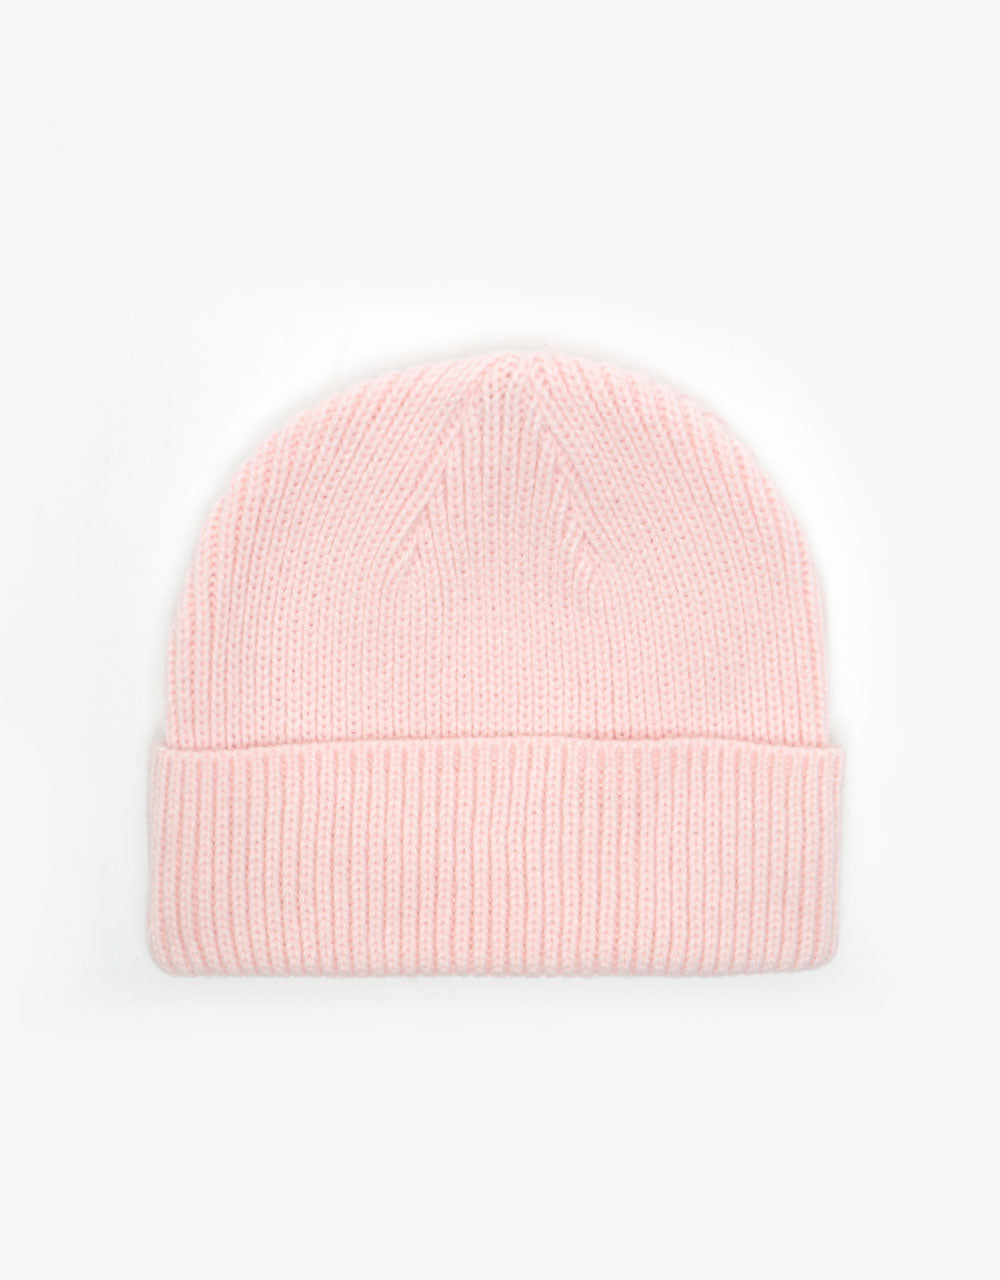 Dickies Woodworth Beanie - Light Pink